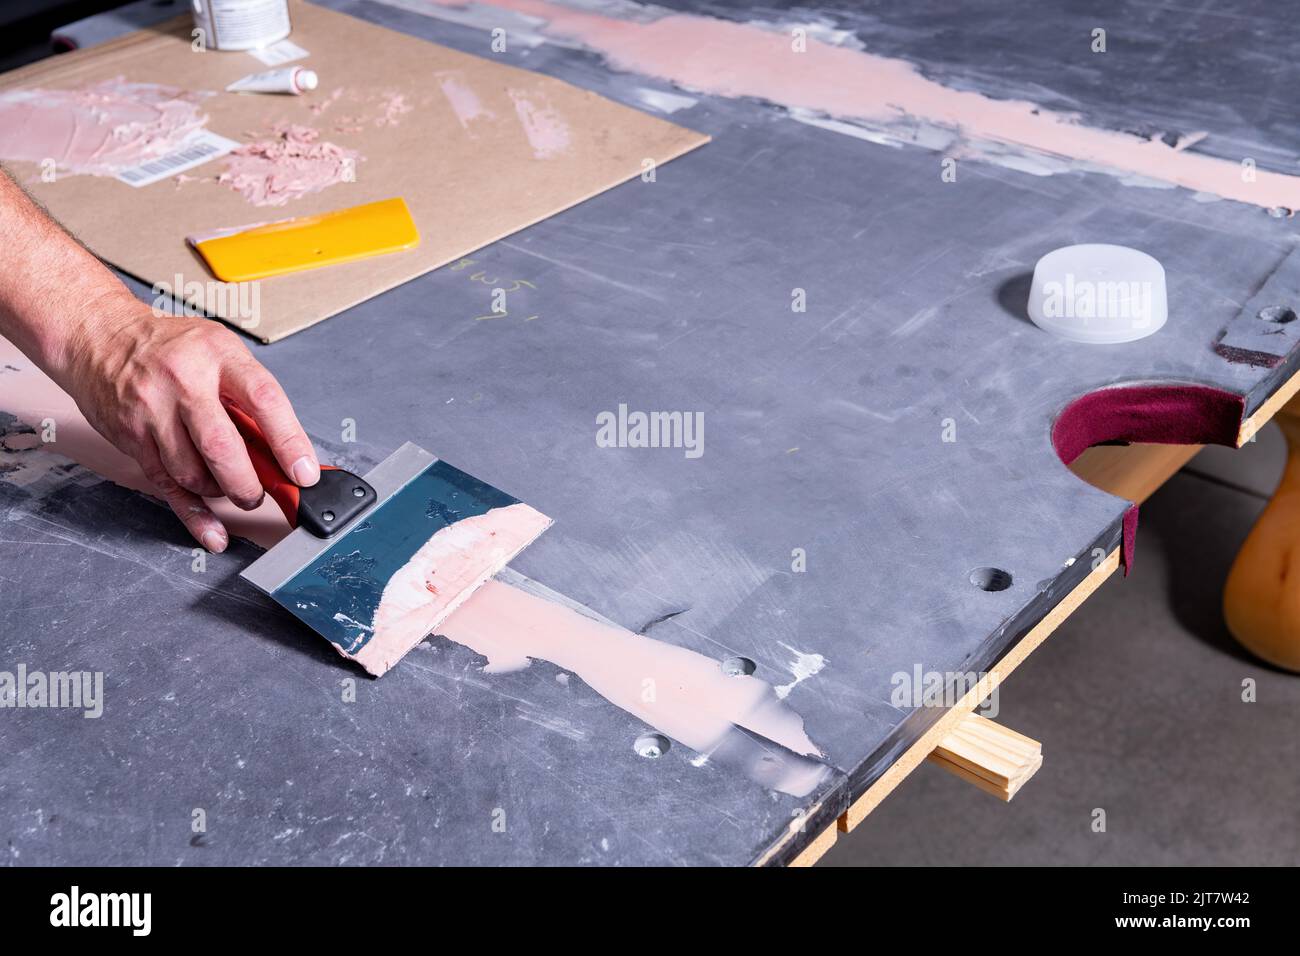 Pool table slate is sealed using a puddy knife Stock Photo